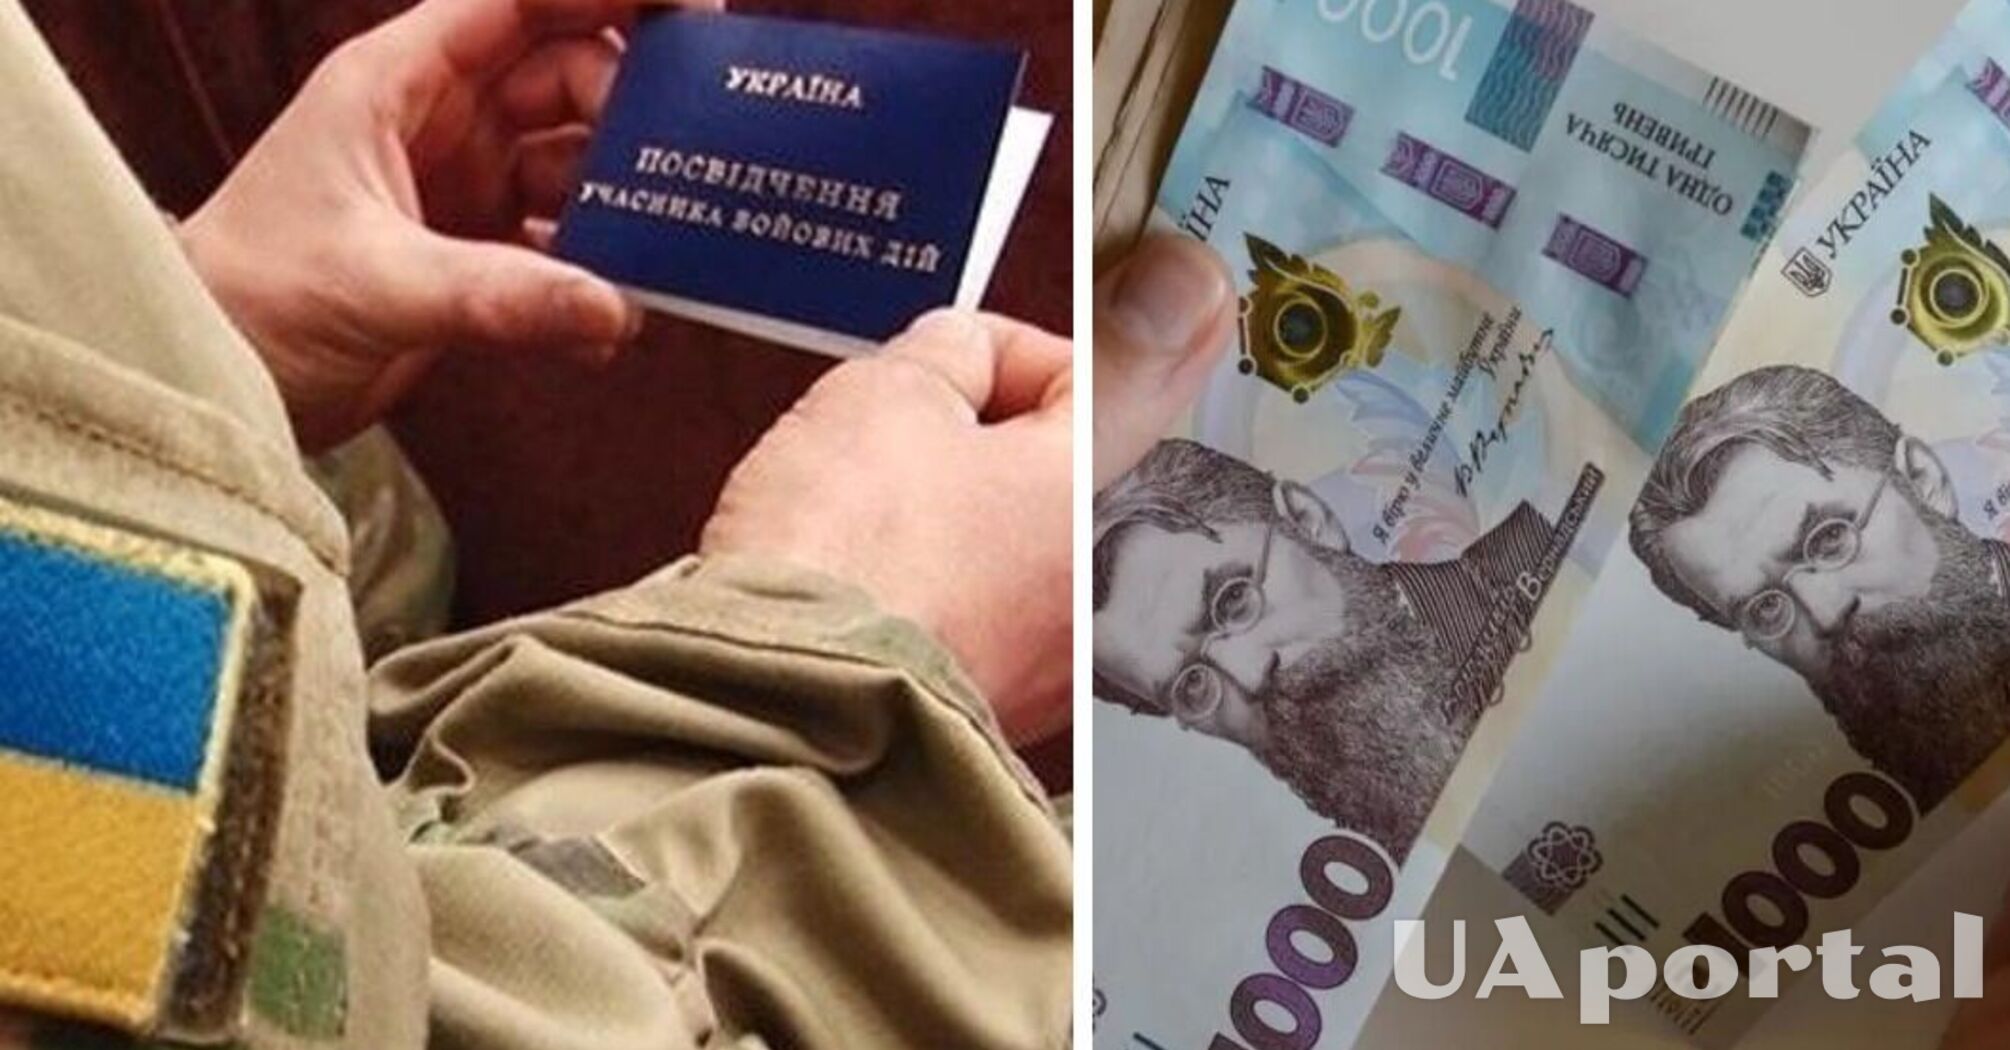 Ukrainians were explained whether they should expect an increase in pensions for the military and combatants